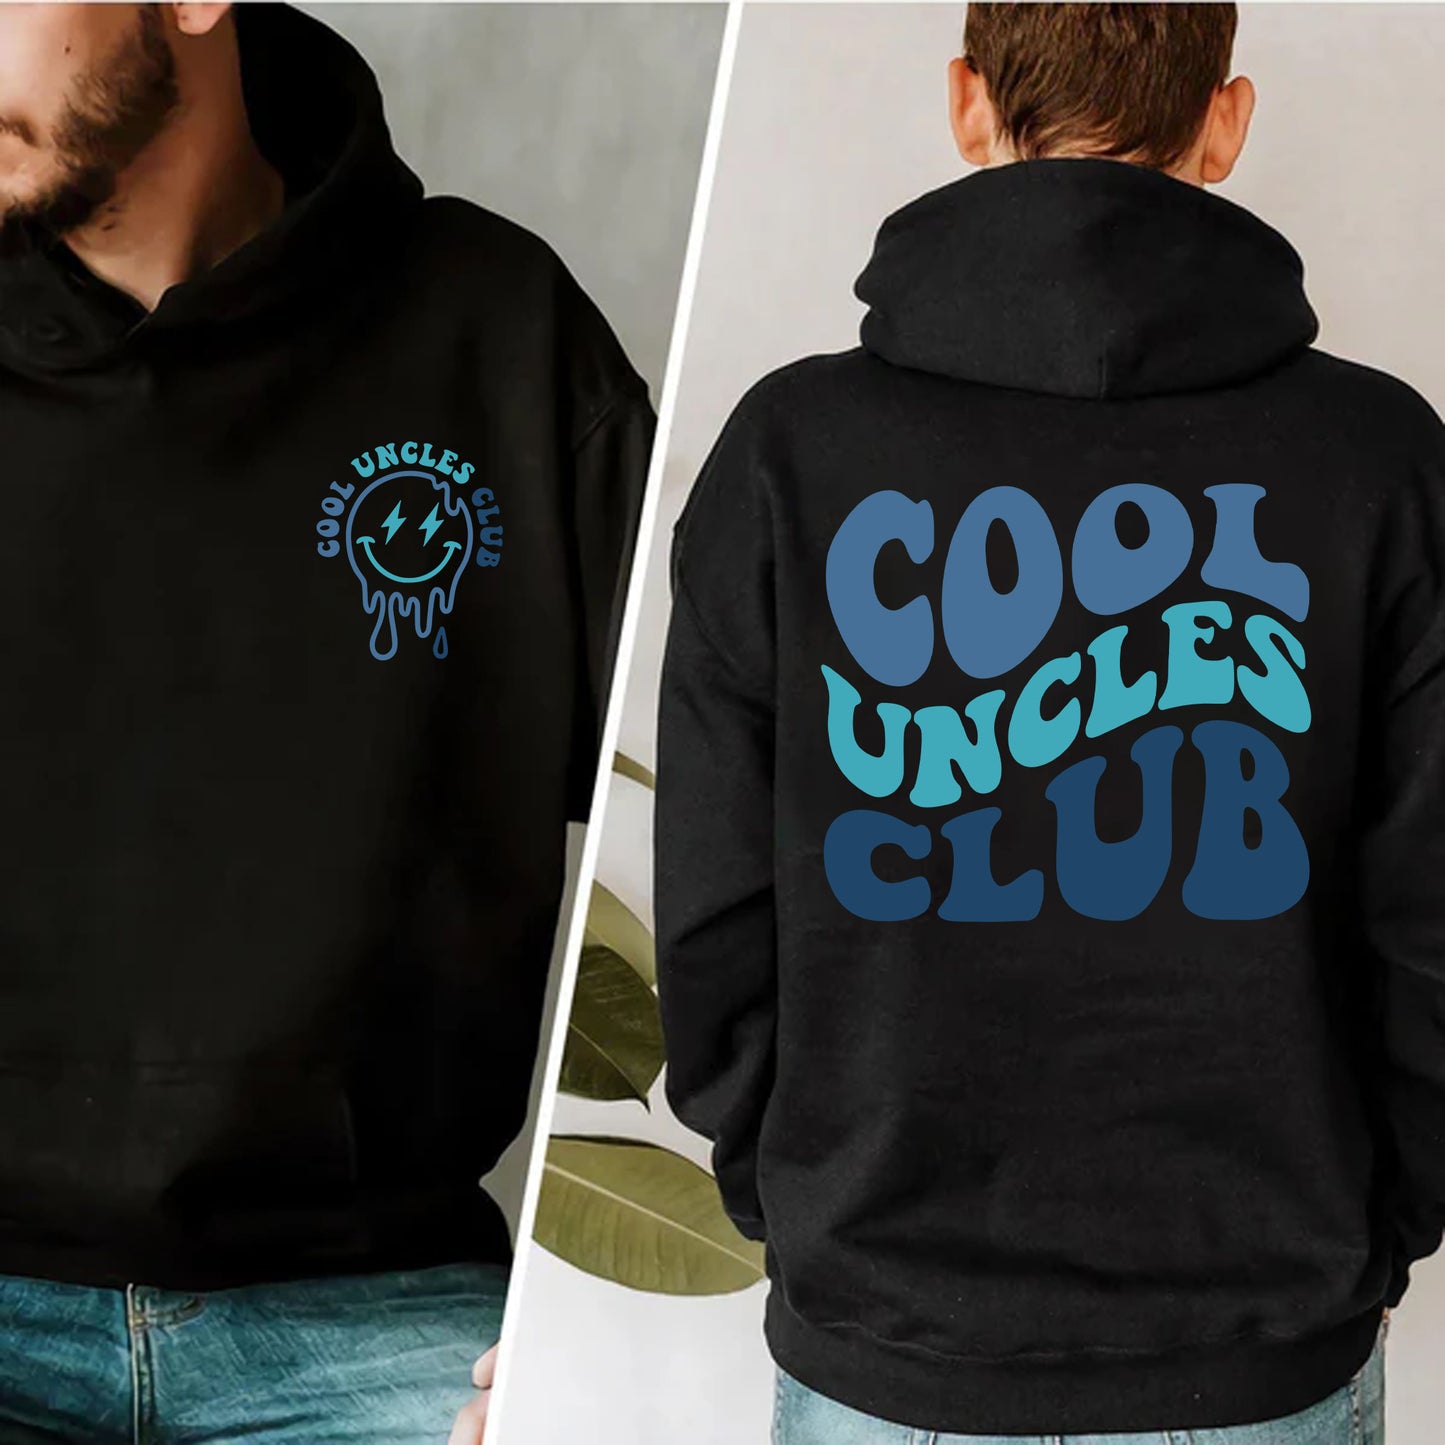 Cool Uncles Club Shirt - Uncle Gift